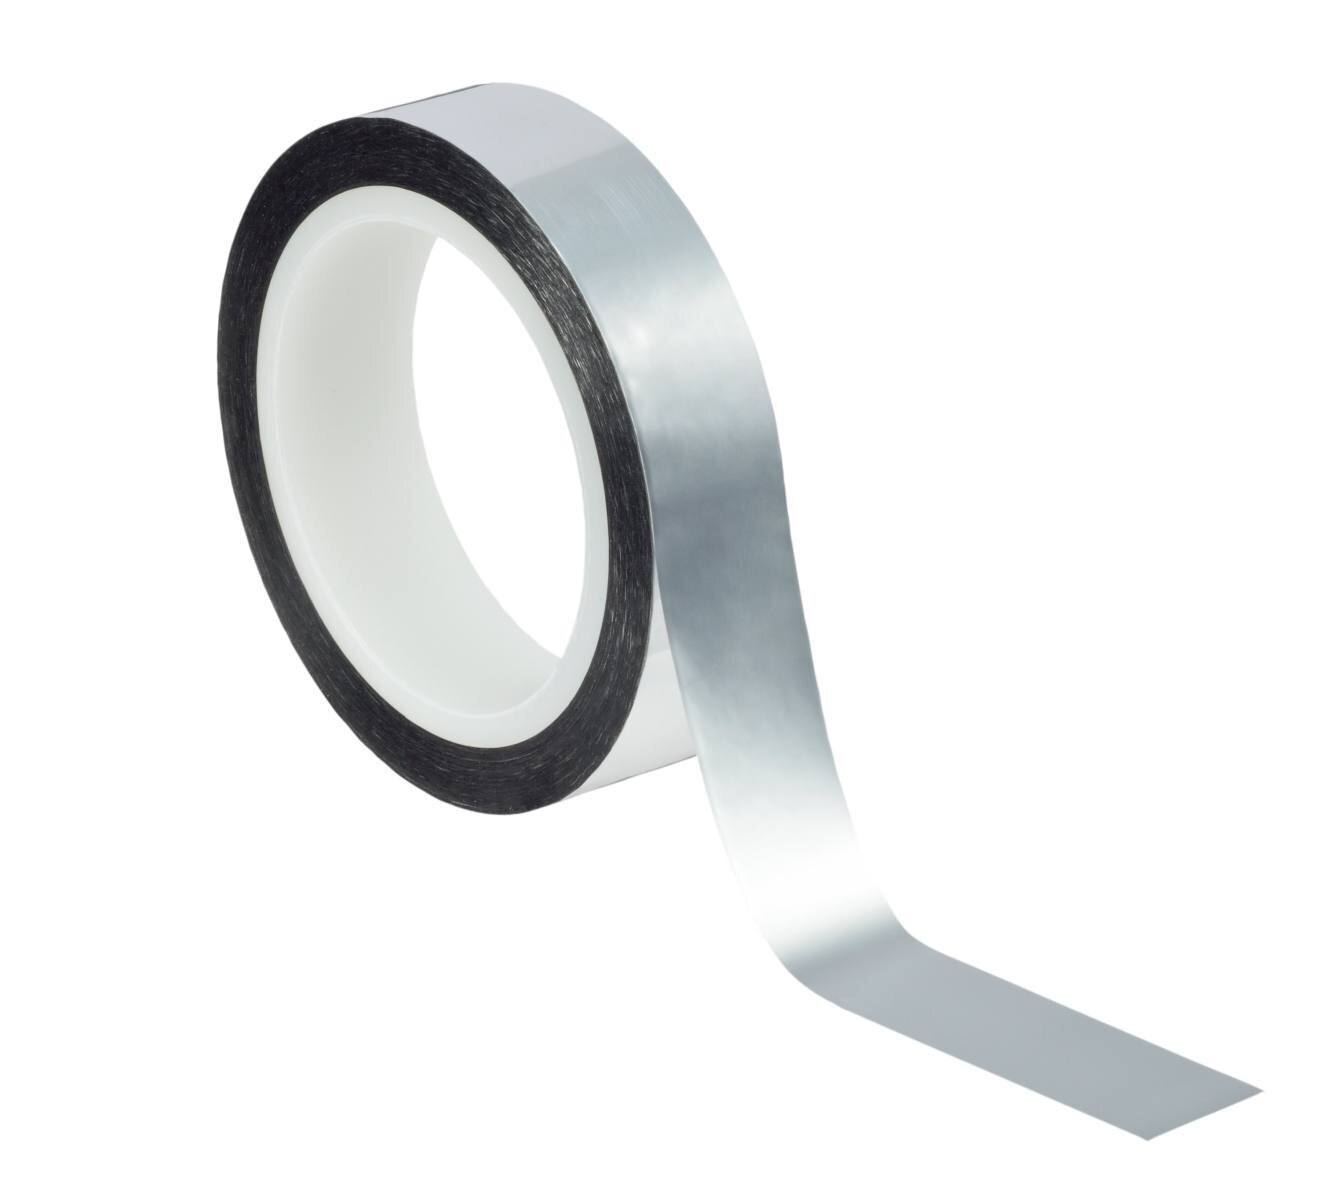 3M polyester adhesive tape 850 S, silver, 15 mm x 66 m, 0.05 mm